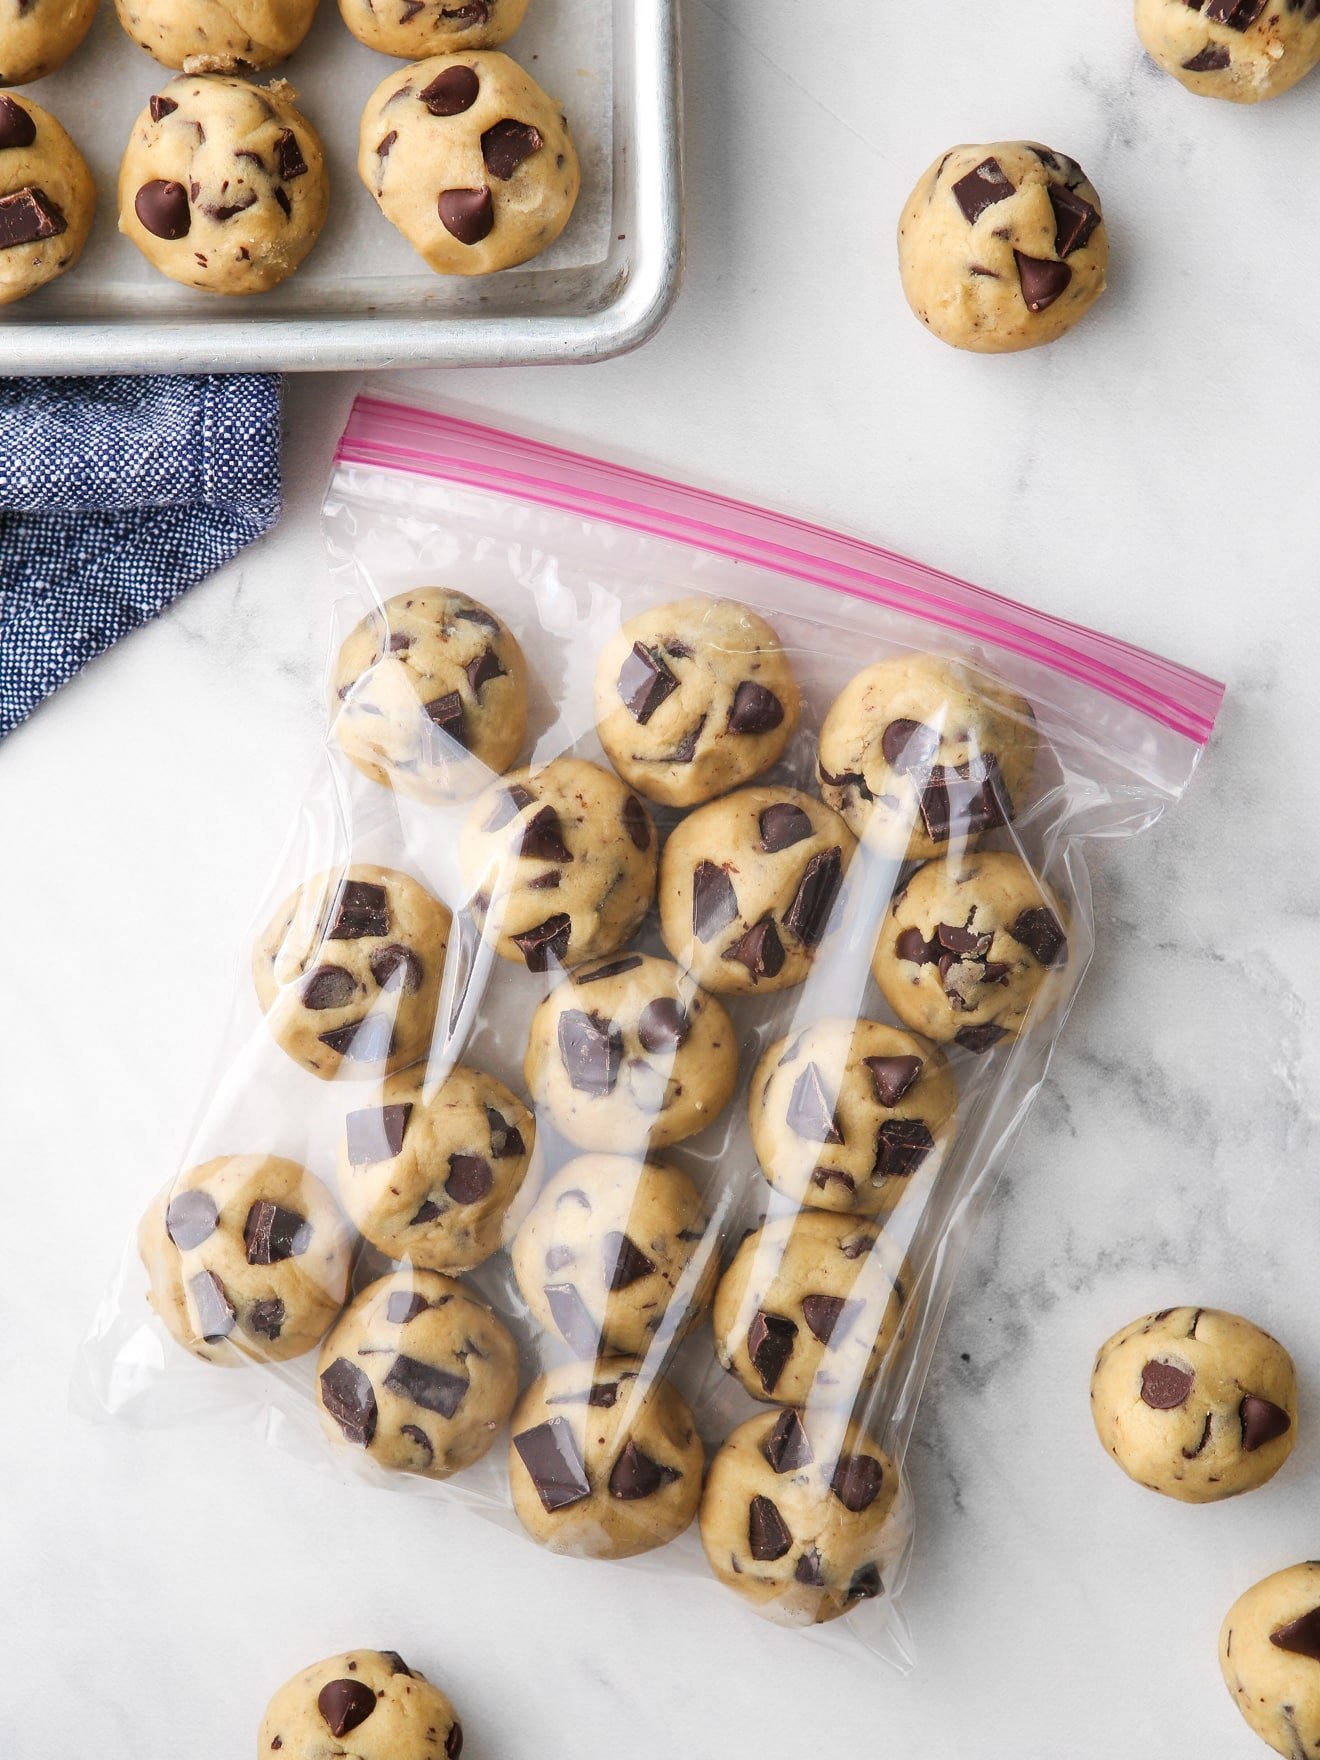 https://www.completelydelicious.com/wp-content/uploads/2021/06/how-to-freeze-cookie-dough-6.jpg